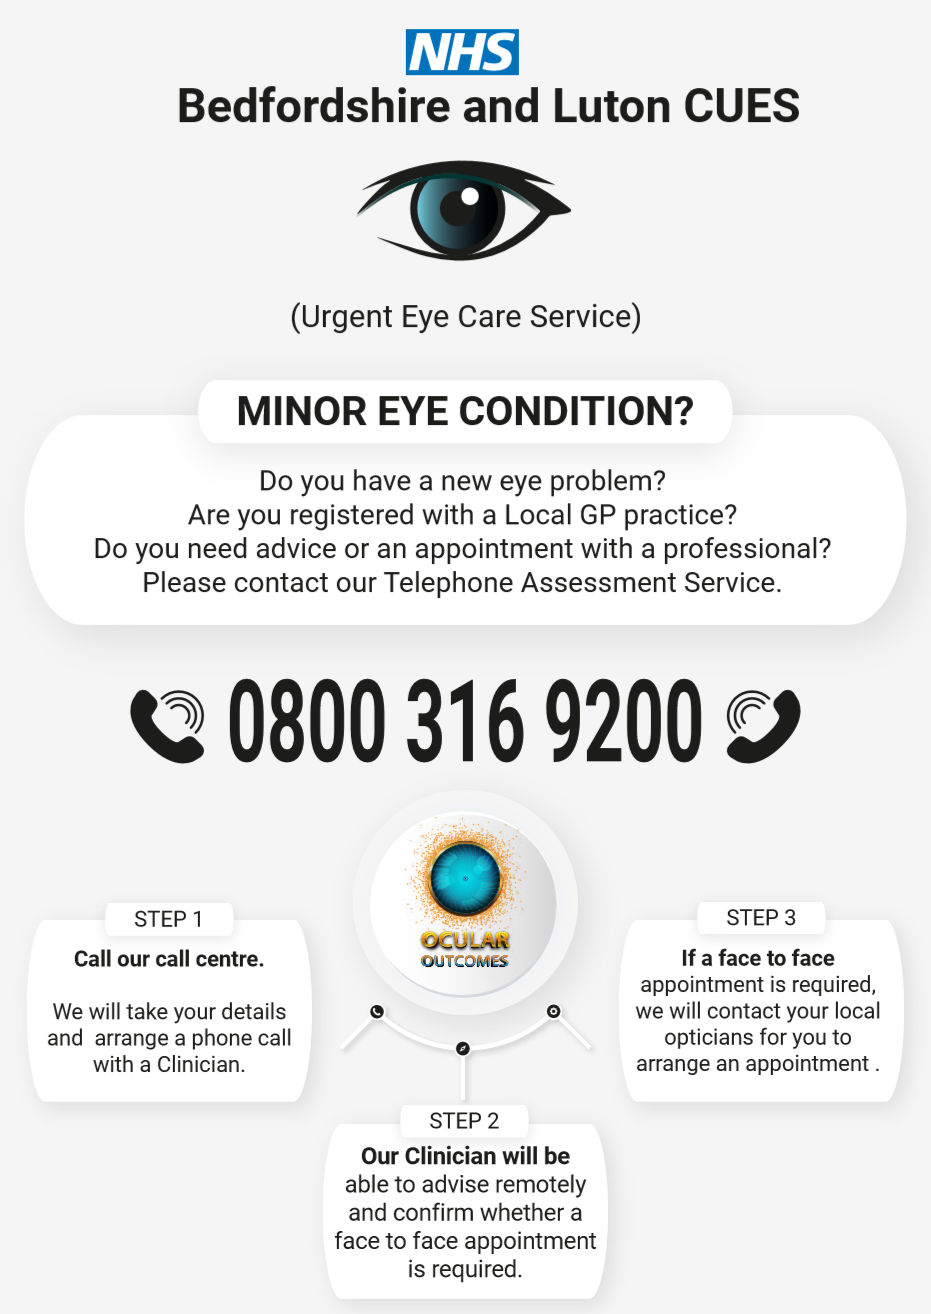 Minor Eye Condition - telephone number 0800 316 9200